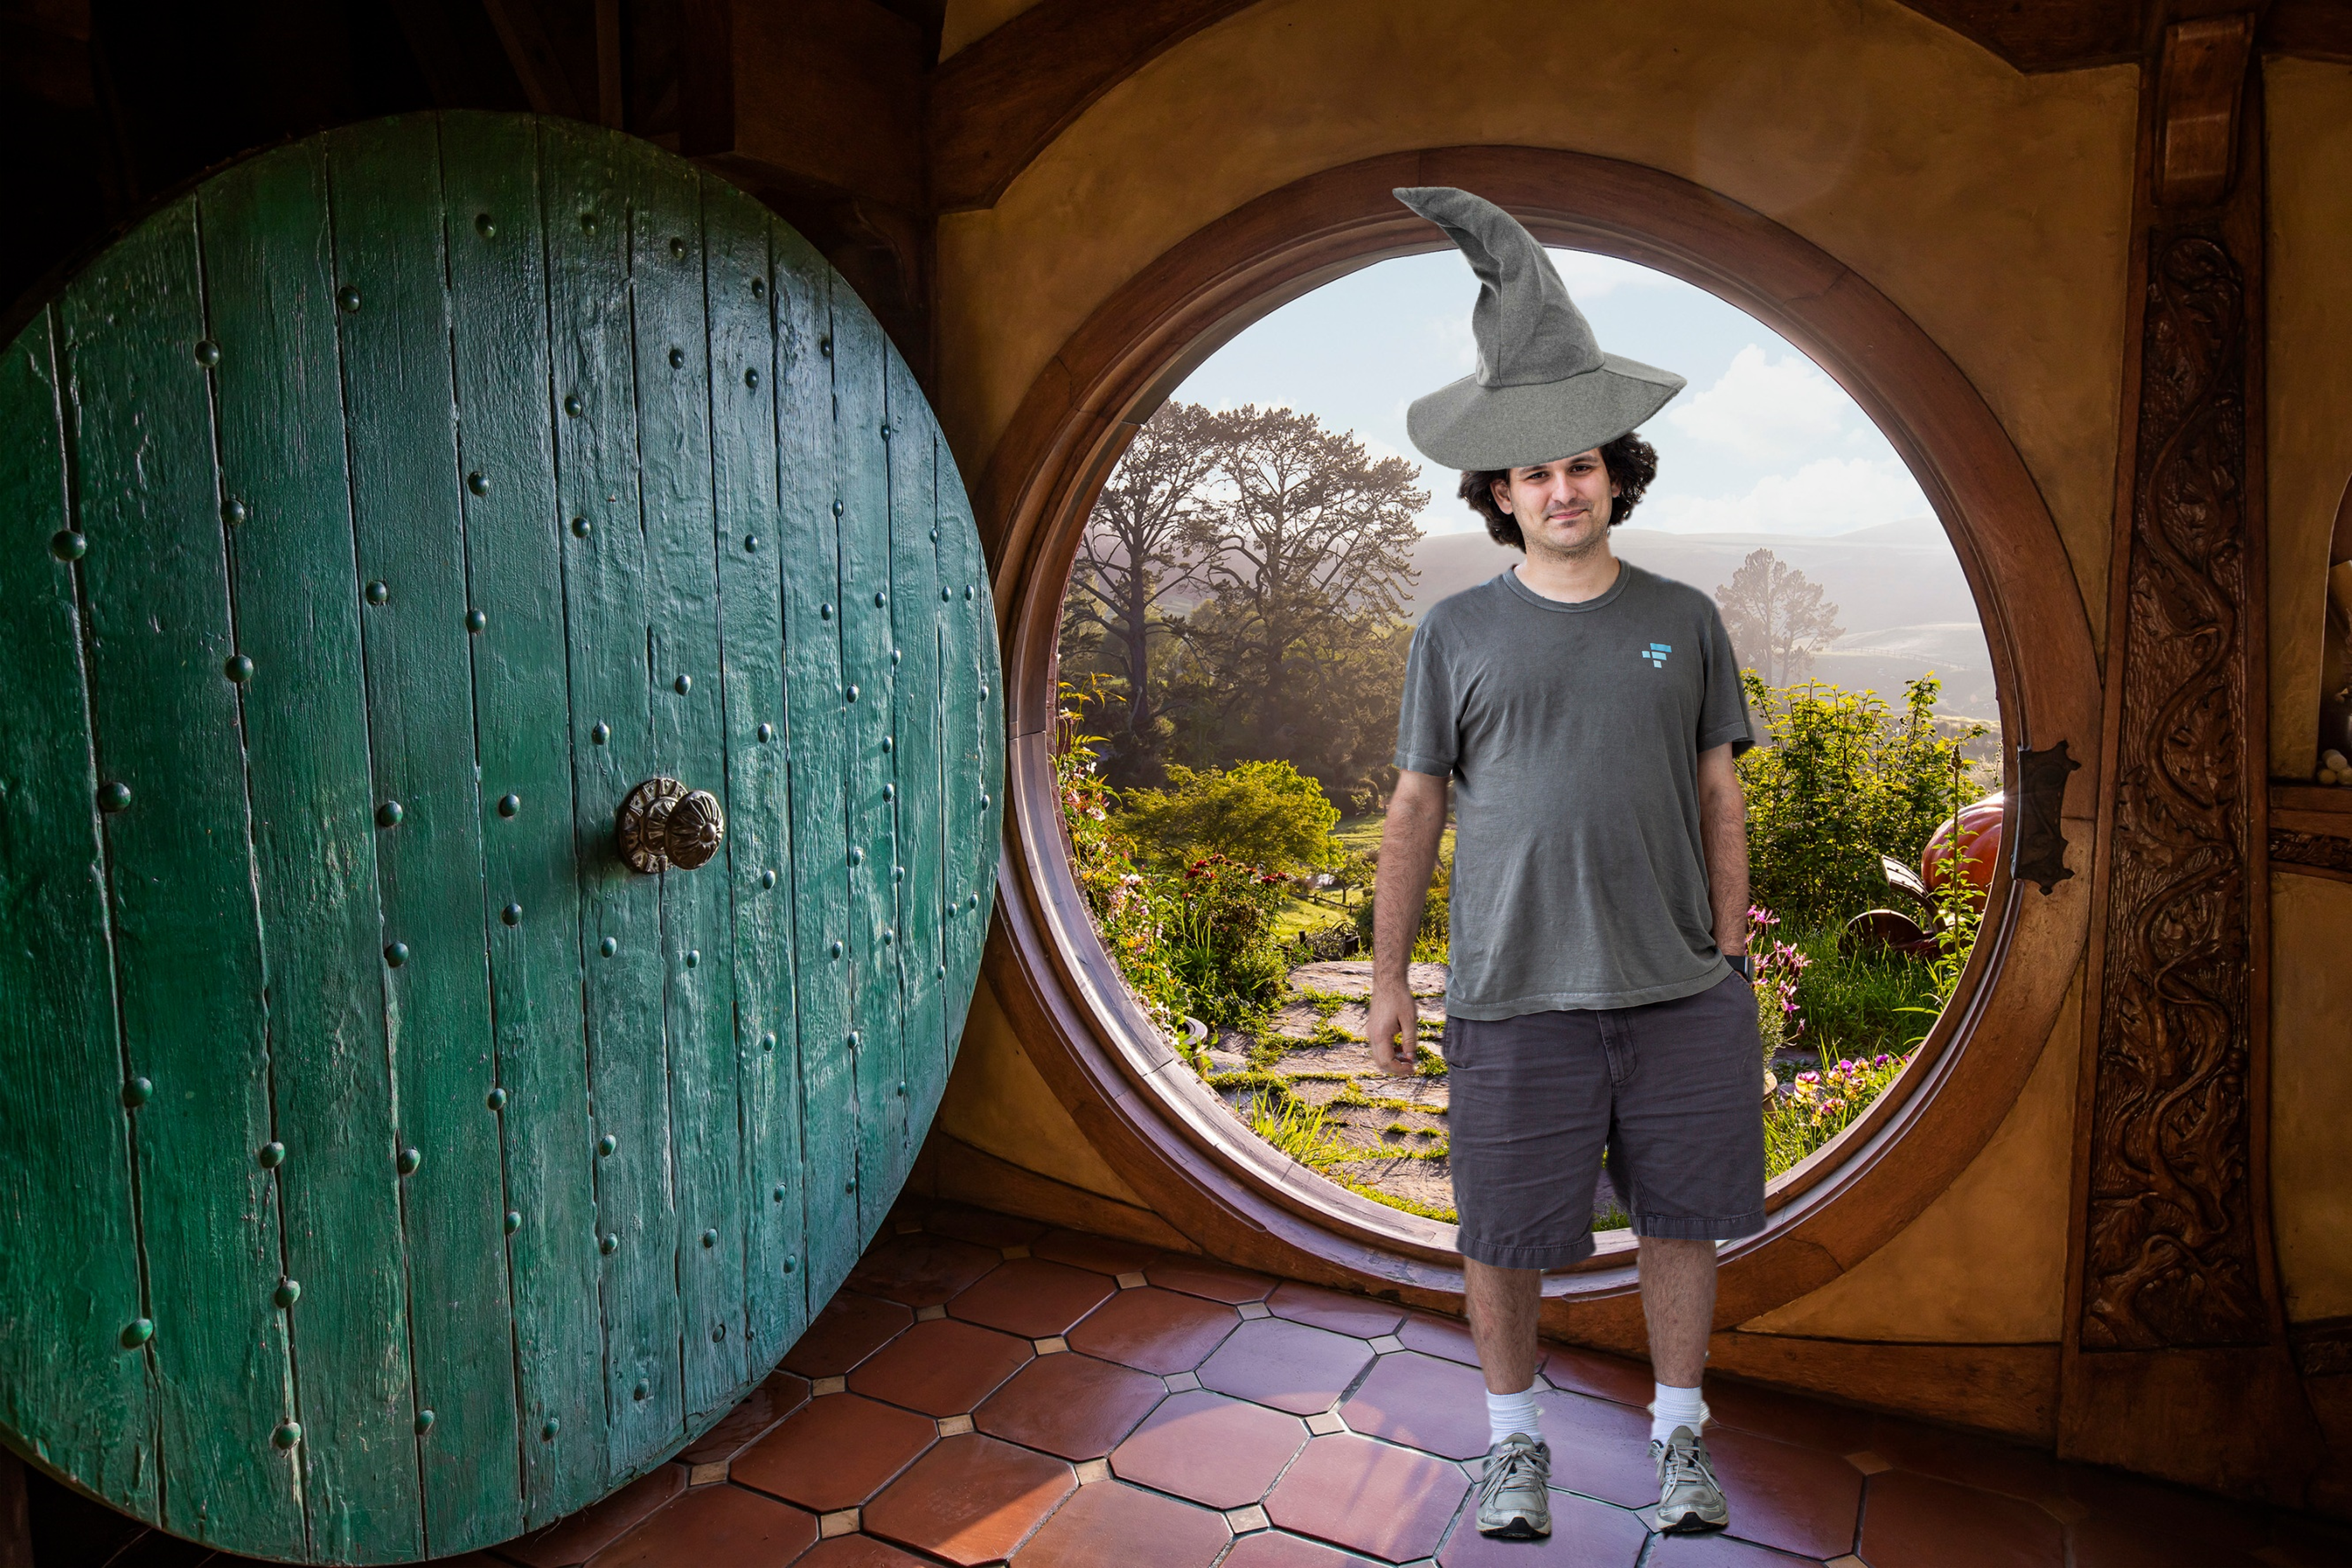 a young man (Sam Bankman-Fried) in grey shorts, tshirts and a wizard hat standing inside a hobbit house with a green open door behind him